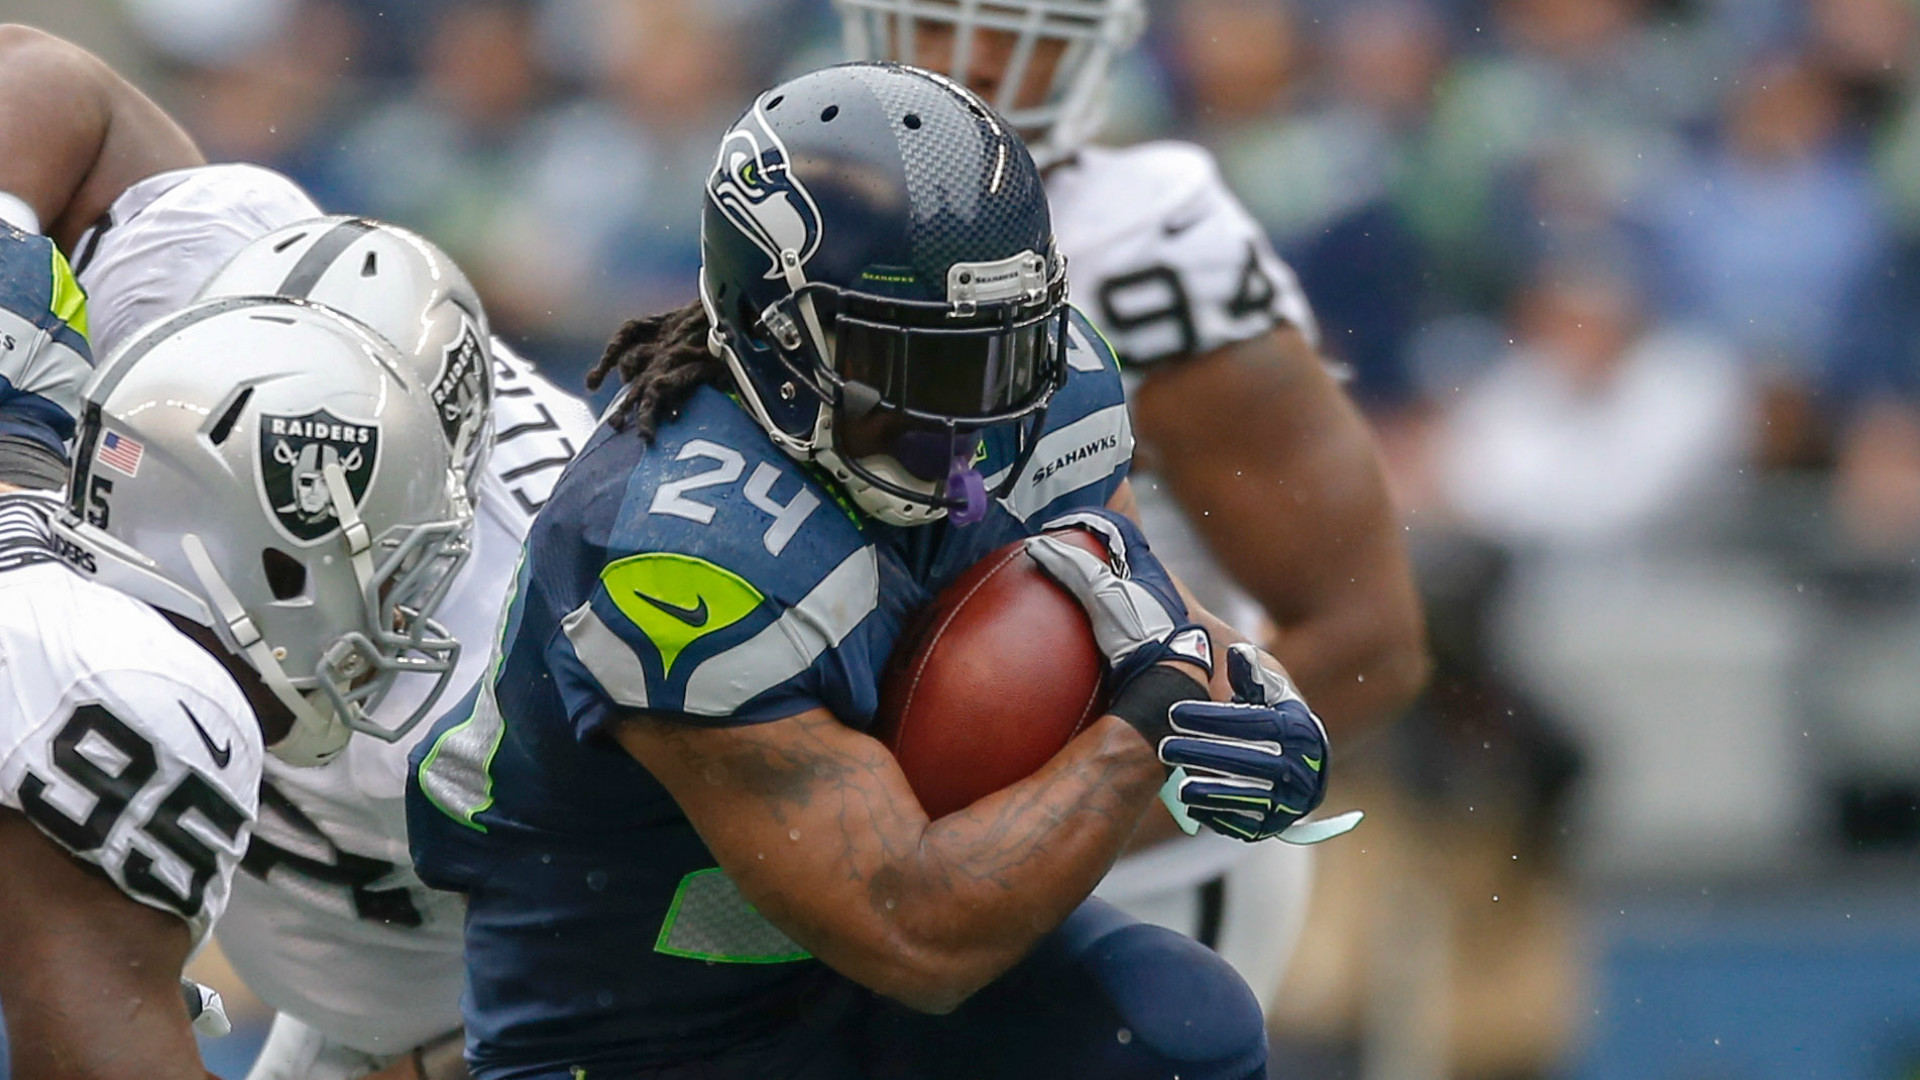 1920x1080 Marshawn Lynch trade rumors: Why a Raiders-Seahawks deal is difficult | NFL  | Sporting News